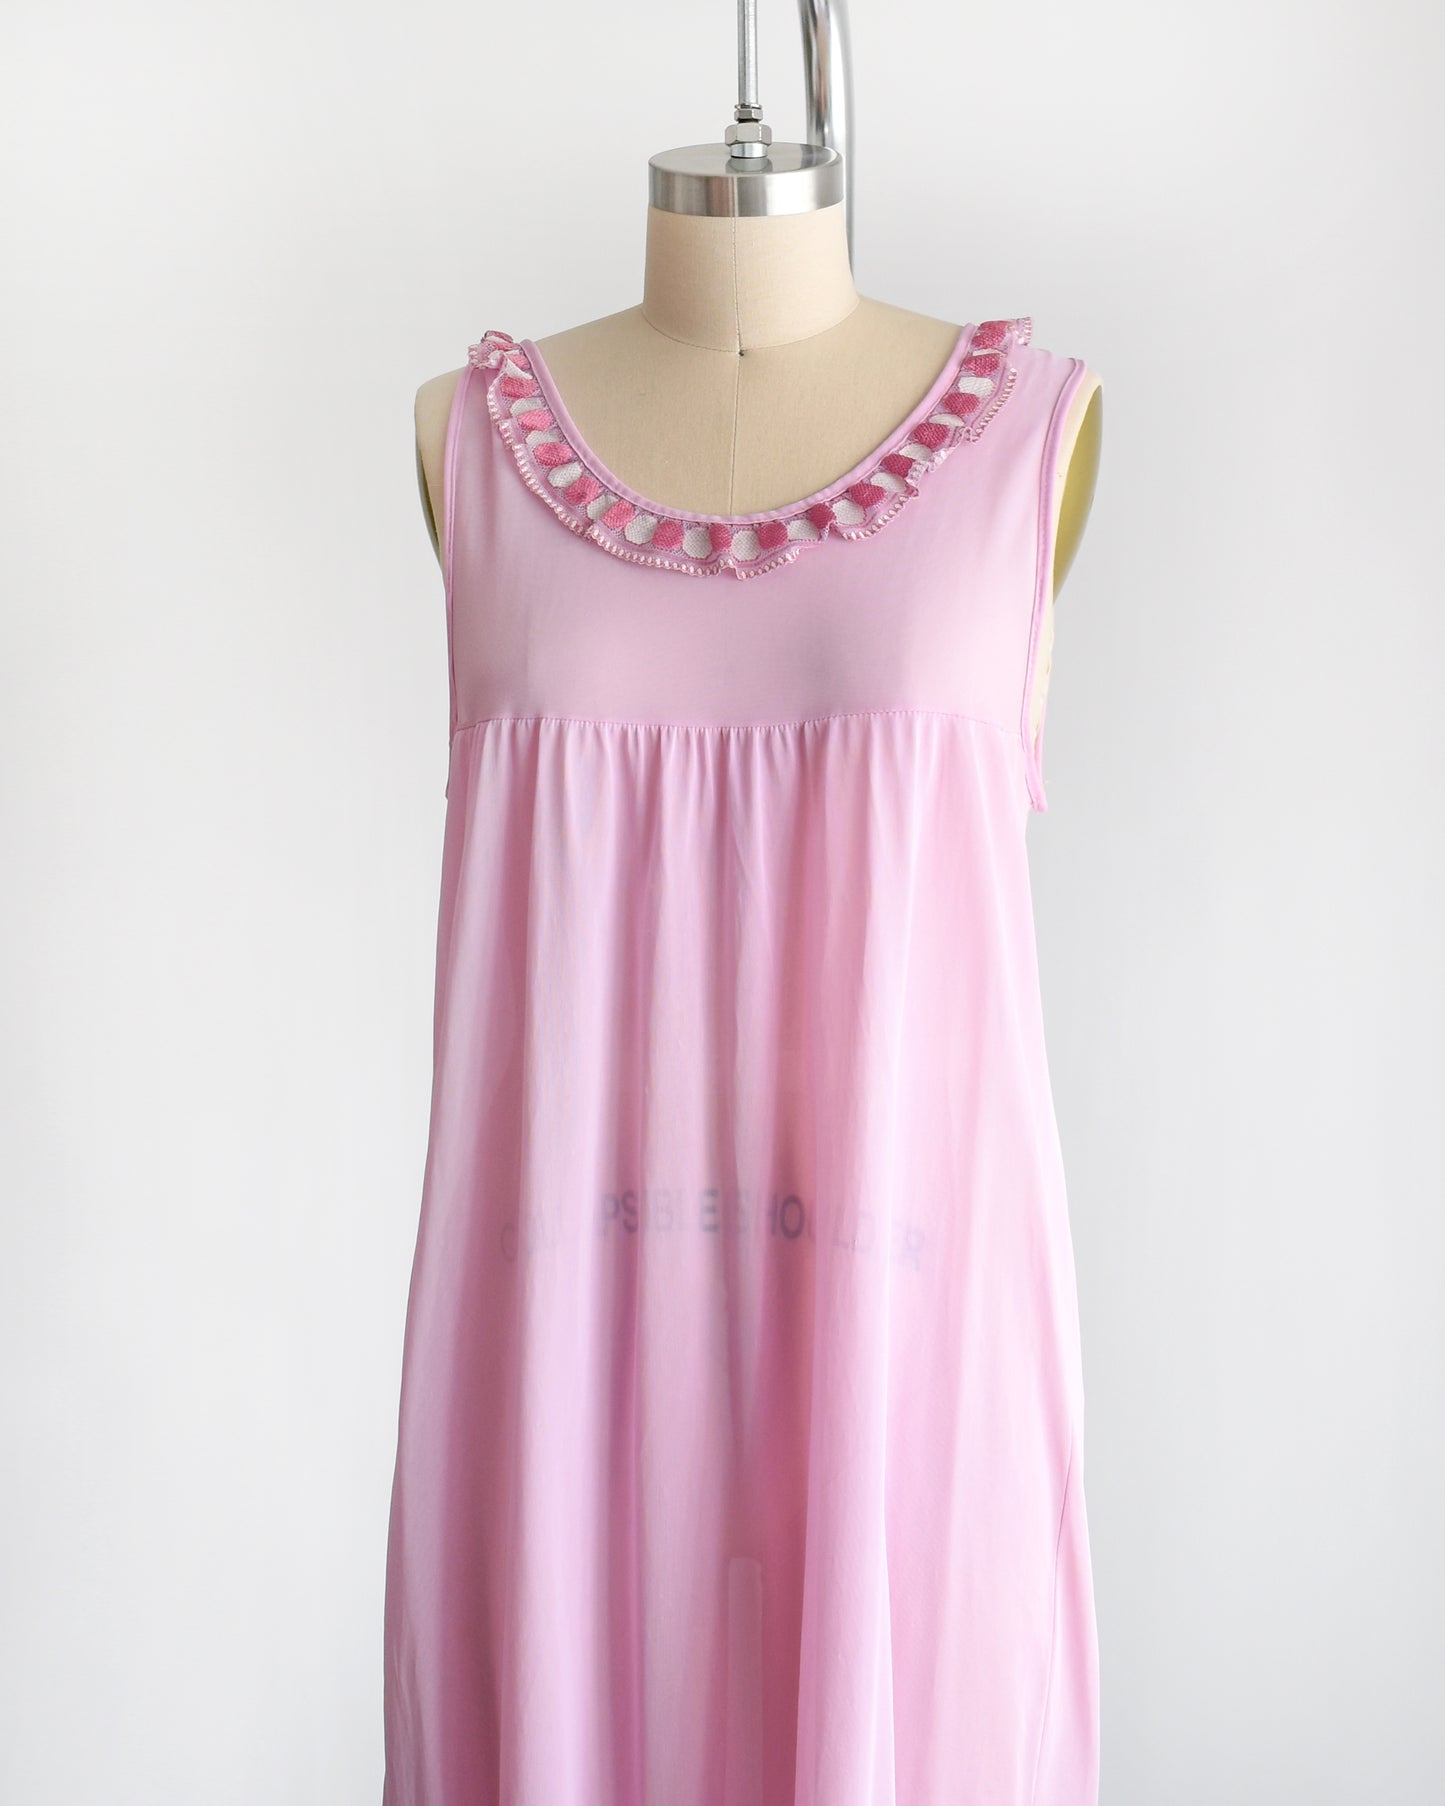 Side front view of a vintage late 1960s early 1970s pinky purple nightgown with embroidered ruffle trim under the neckline